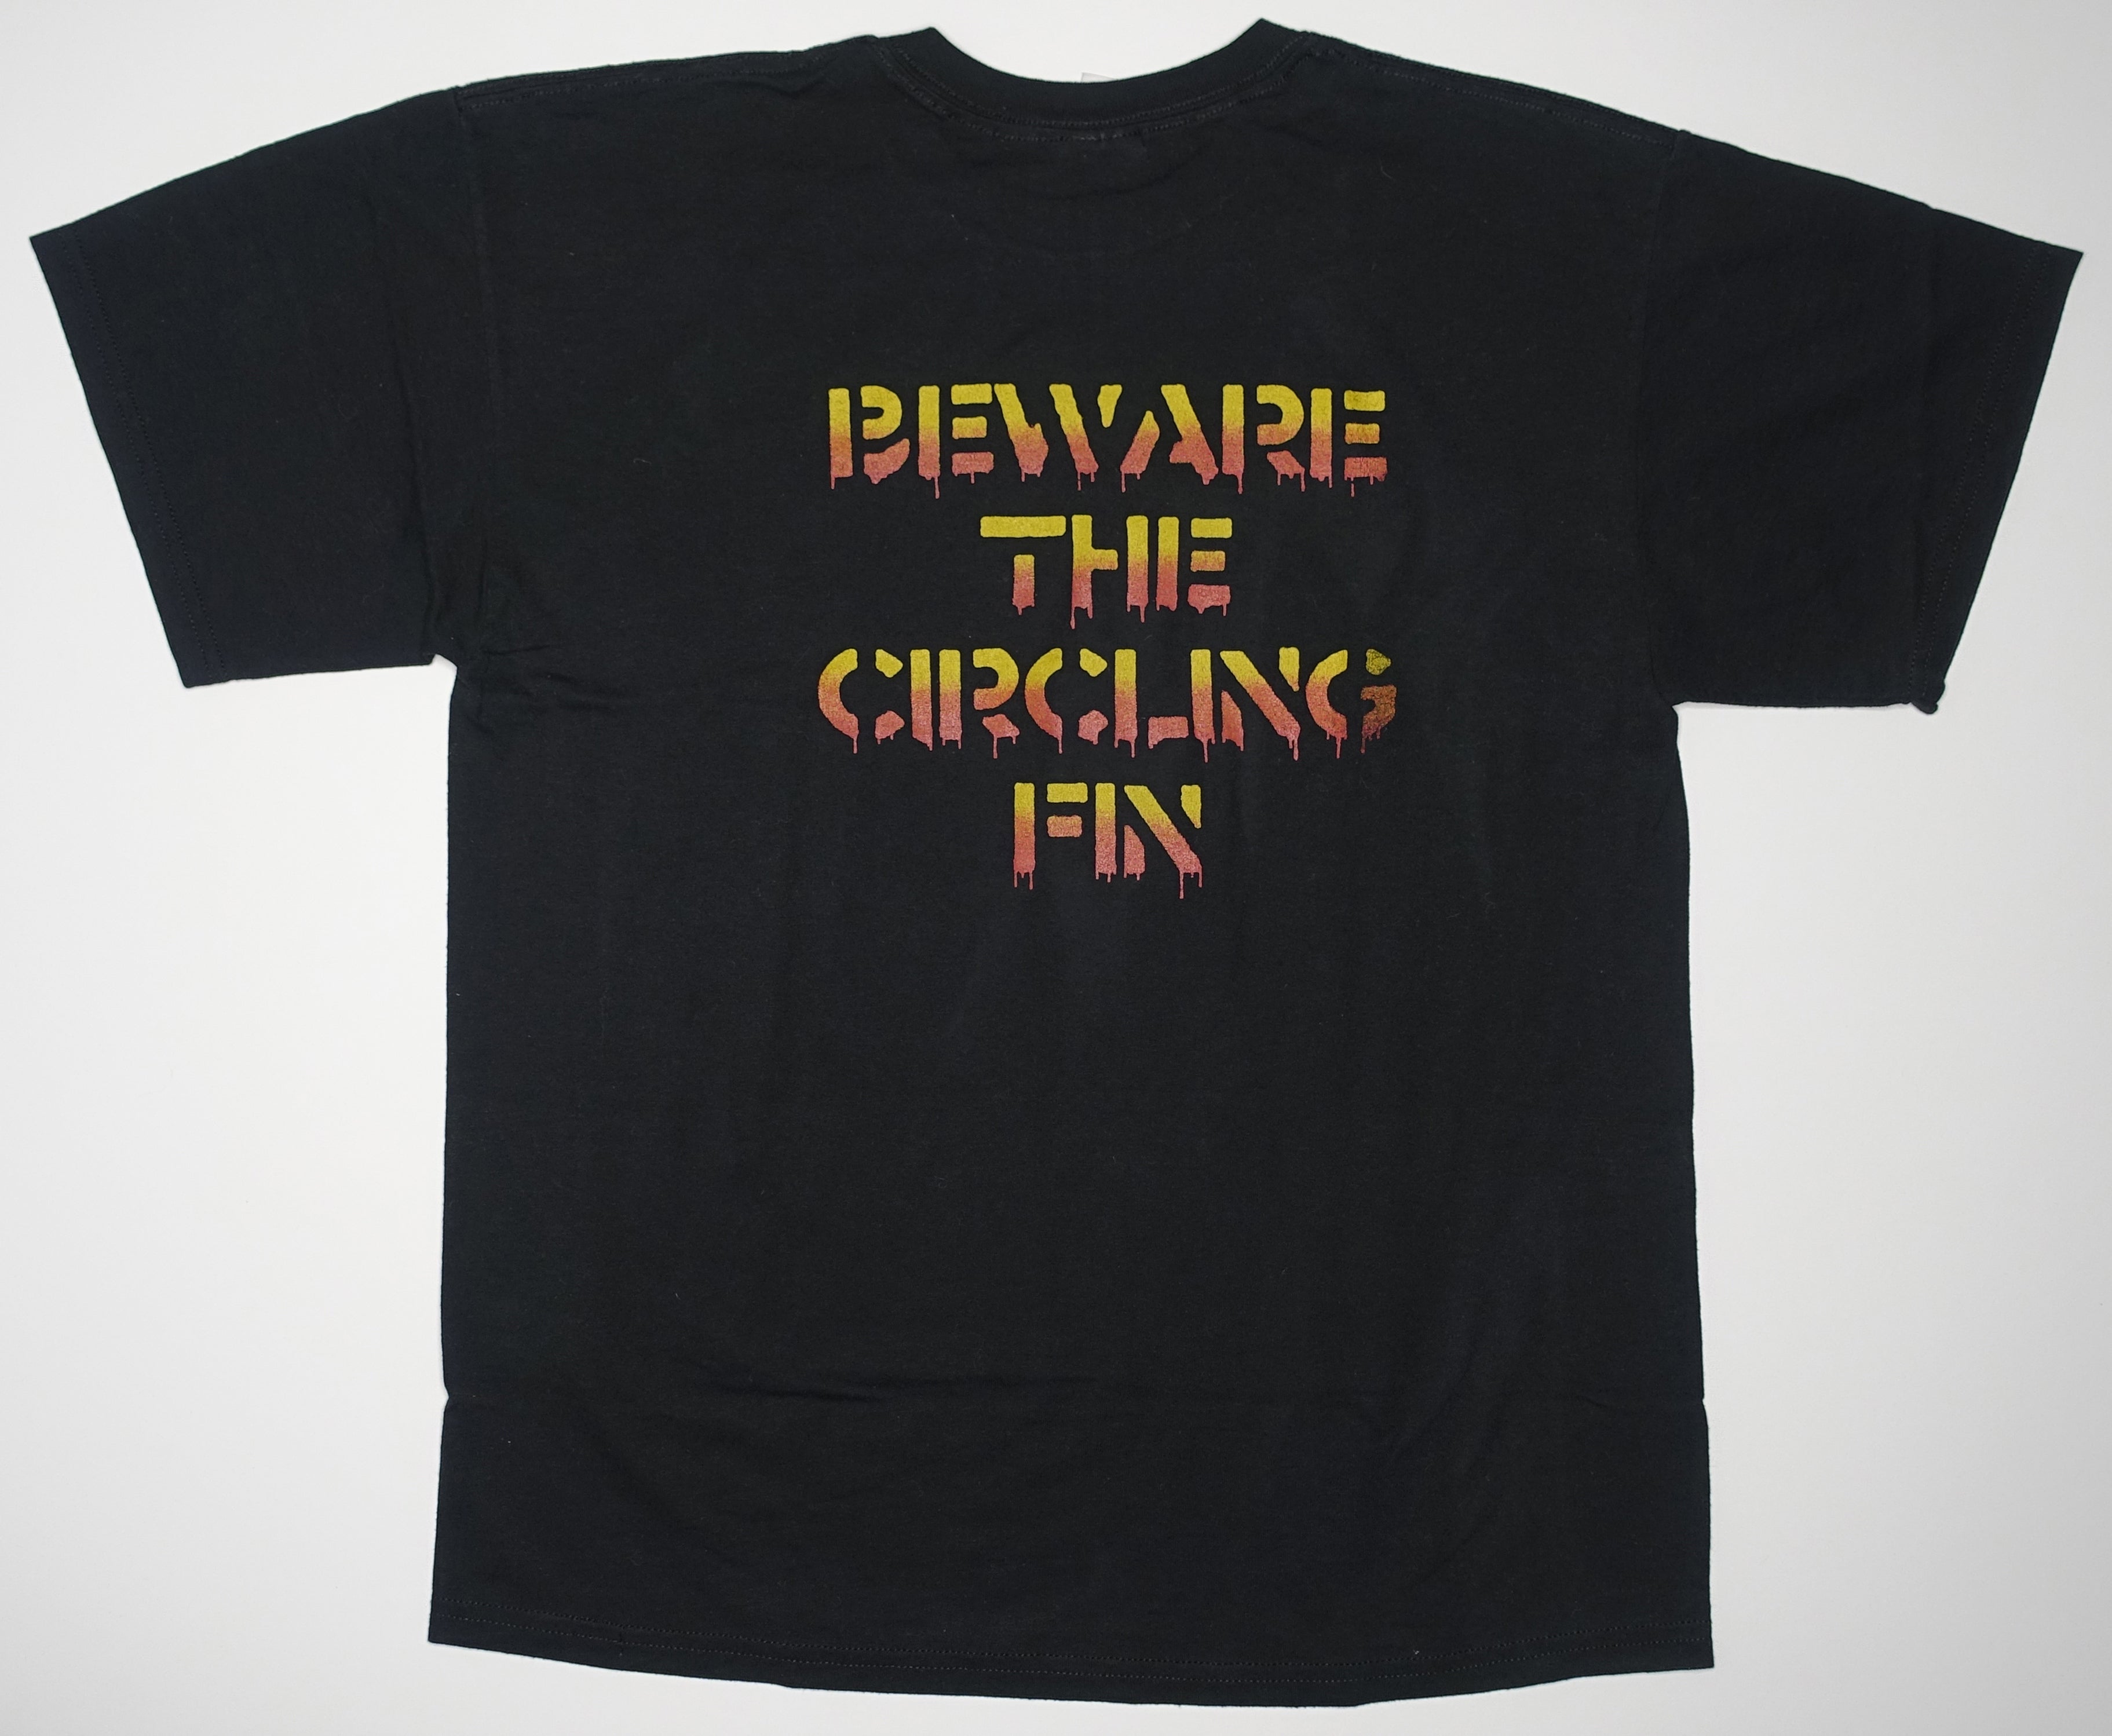 Early Man - Beware The Circling Fin 2008 Tour Shirt Size Large